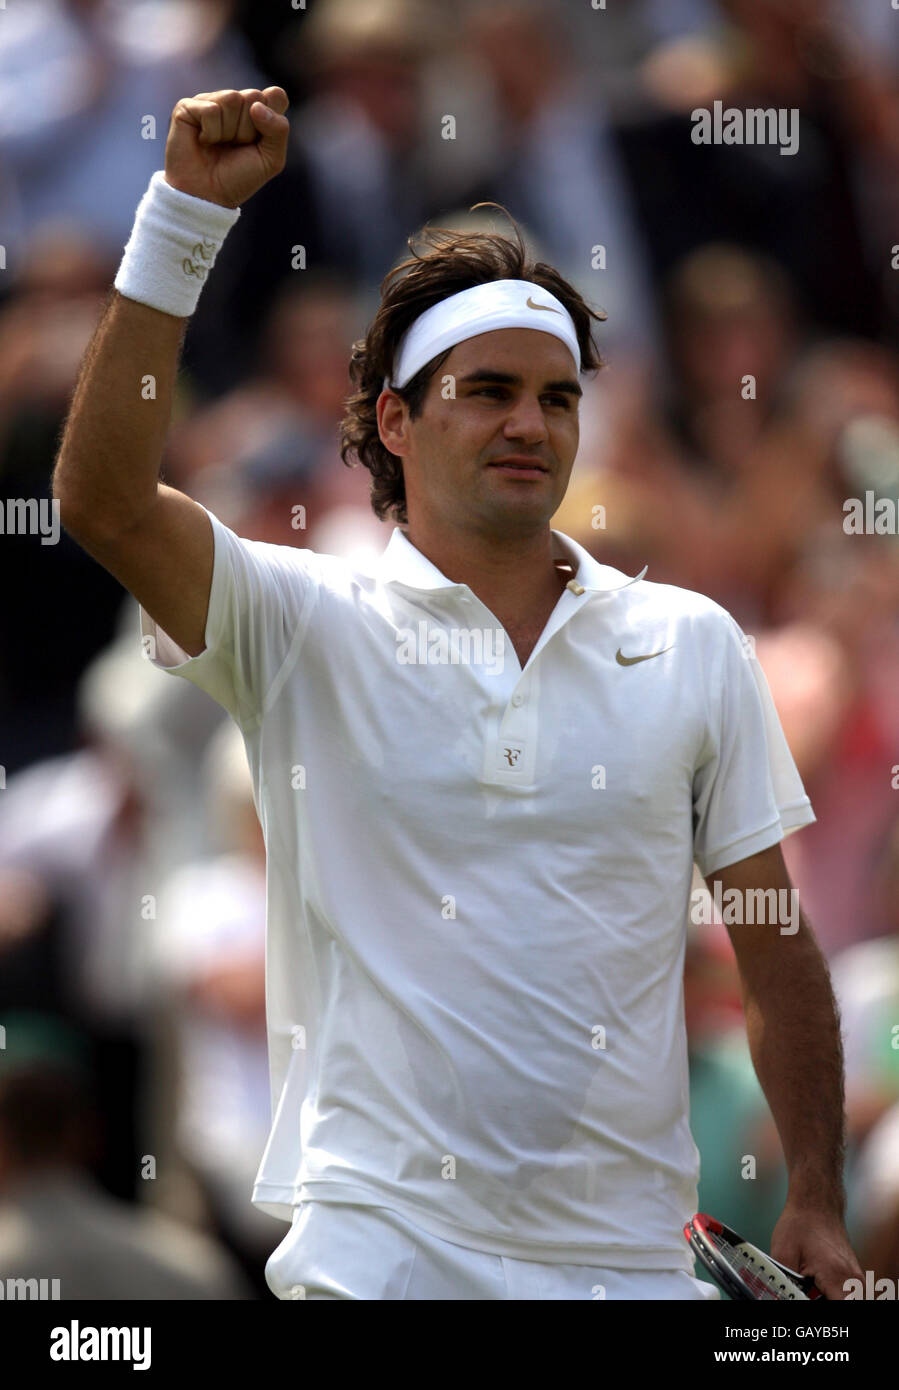 Switzerland's Roger Federer celebrates victory against Australia's Lleyton Hewitt during the Wimbledon Championships 2008 at the All England Tennis Club in Wimbledon. Stock Photo